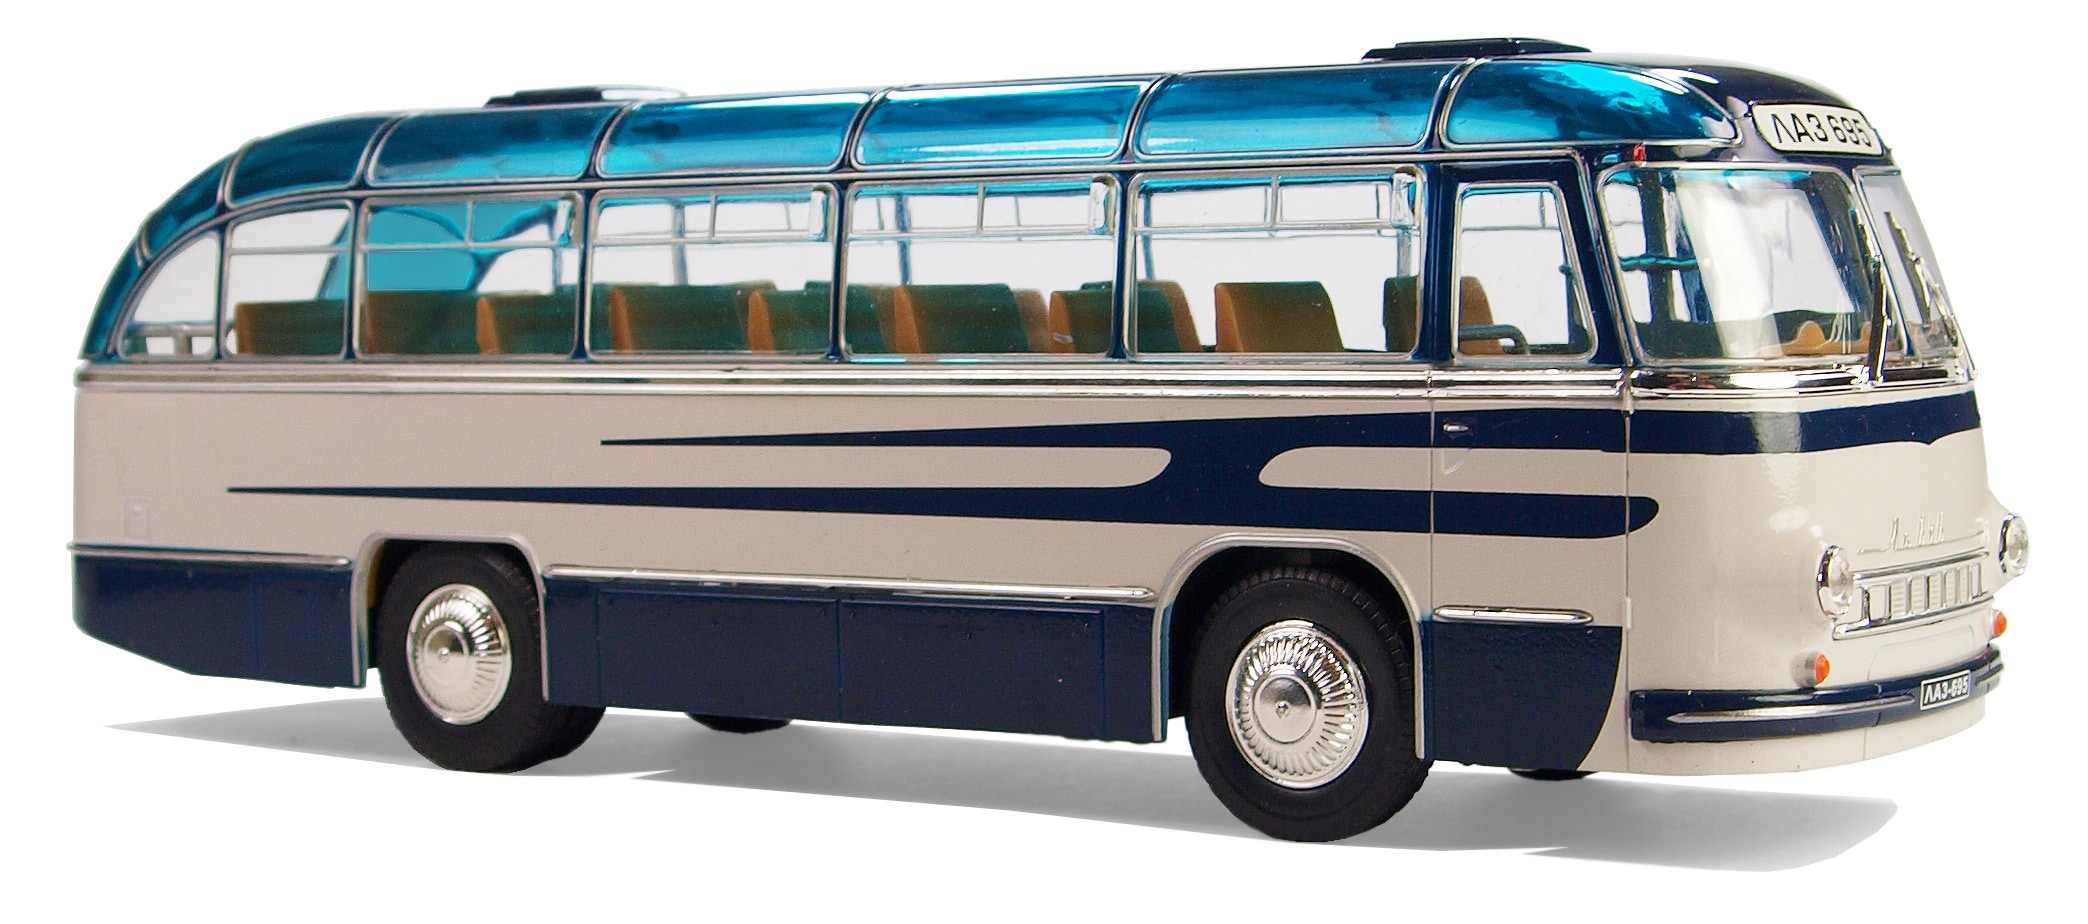 blue and white bus